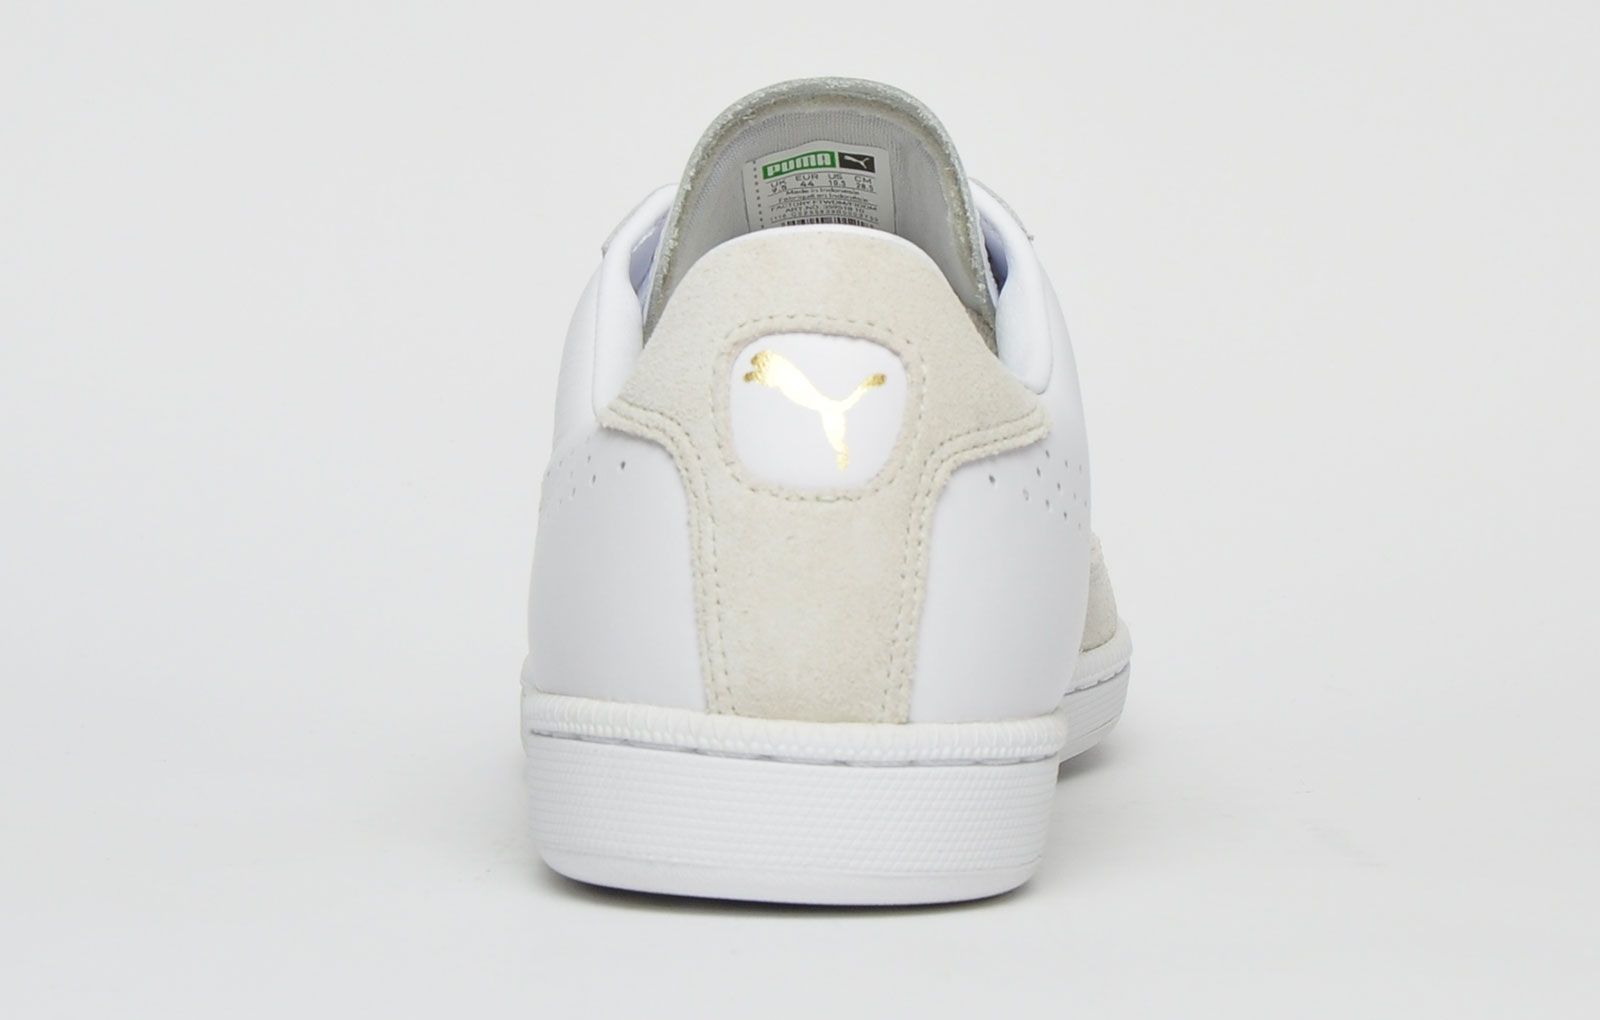 <p>The Puma Match 74 UPC from the iconic 1974 tennis collection features a soft leather upper with side perforations for breathability with the addition of suede panelling to the sides and heel with gold Puma branding to the side to complete the look.</p> <p>The Match 74 men’s shoe is finished off with a durable rubber sole with a textured vintage styled finish which will provide stability and grip on all surfaces and with a slimmed down look to give that sporty designer feel</p><br> <p class=